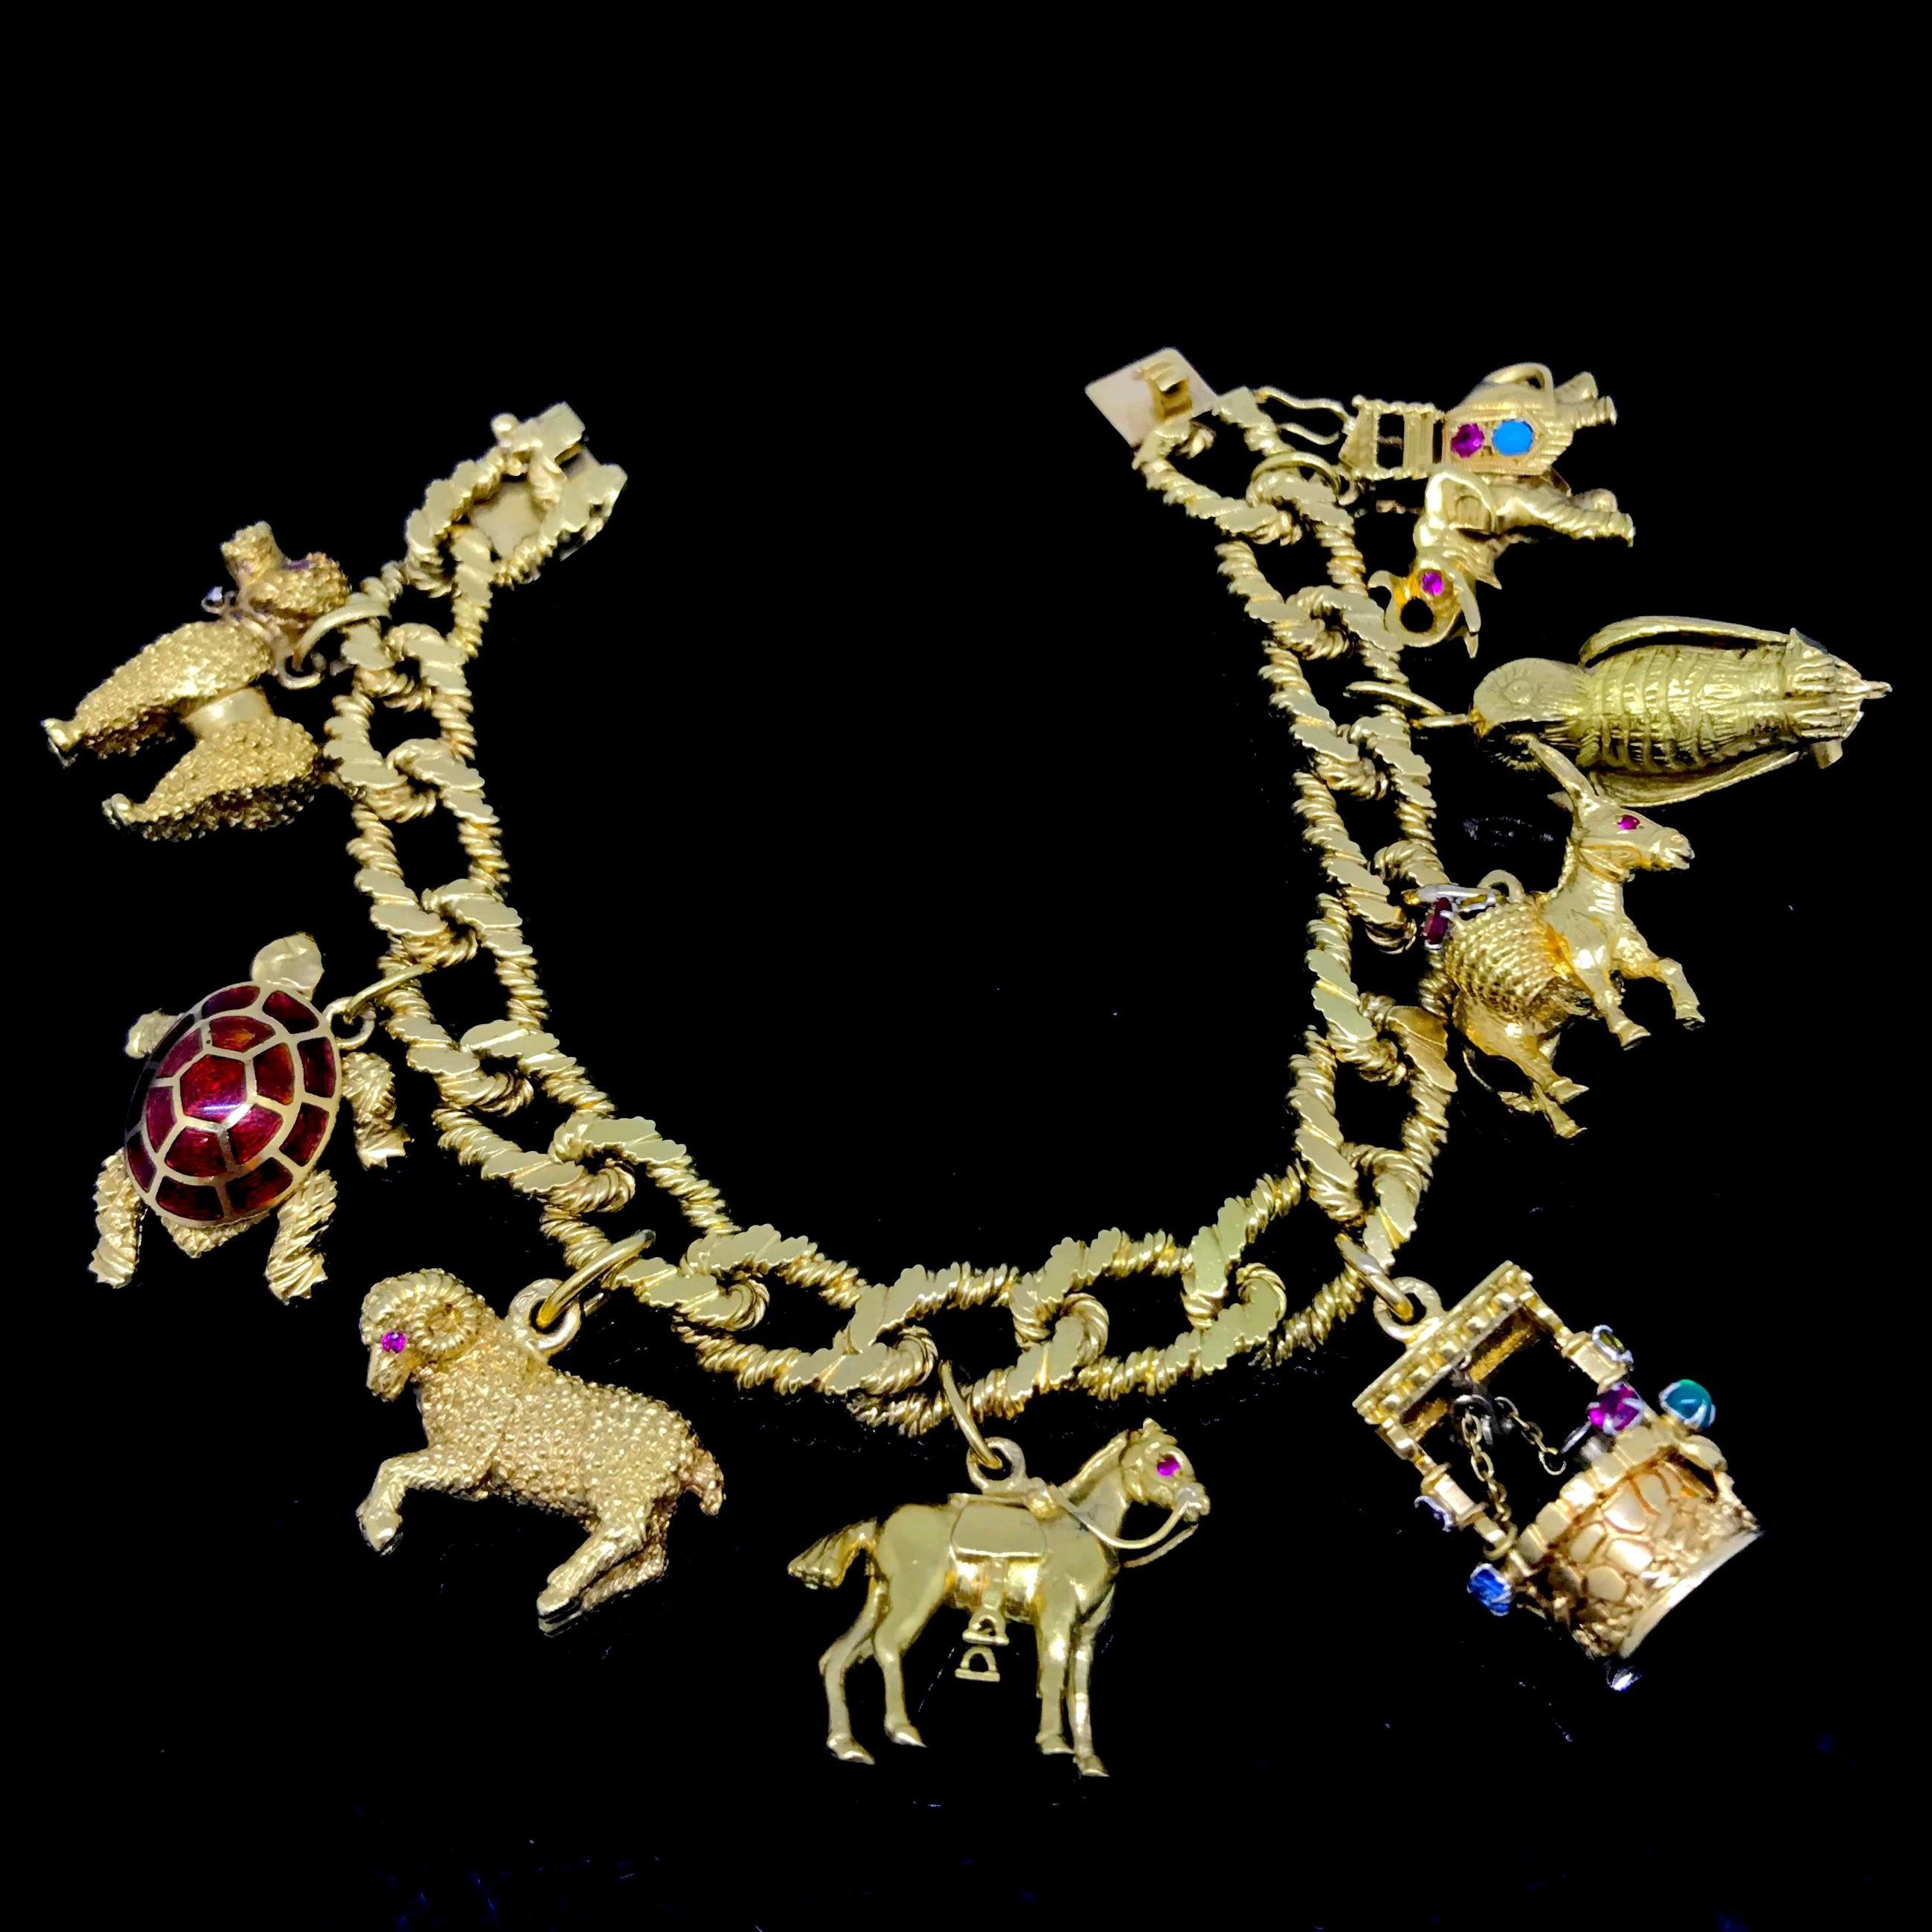 This beautiful vintage charms bracelet is fully made in 18kt yellow gold – each charm and the bracelet are marked with the eagle’s head. There are 8 different charms set with gemstones or enamelled – a poodle, a turtle, a ram, a horse, a well, a